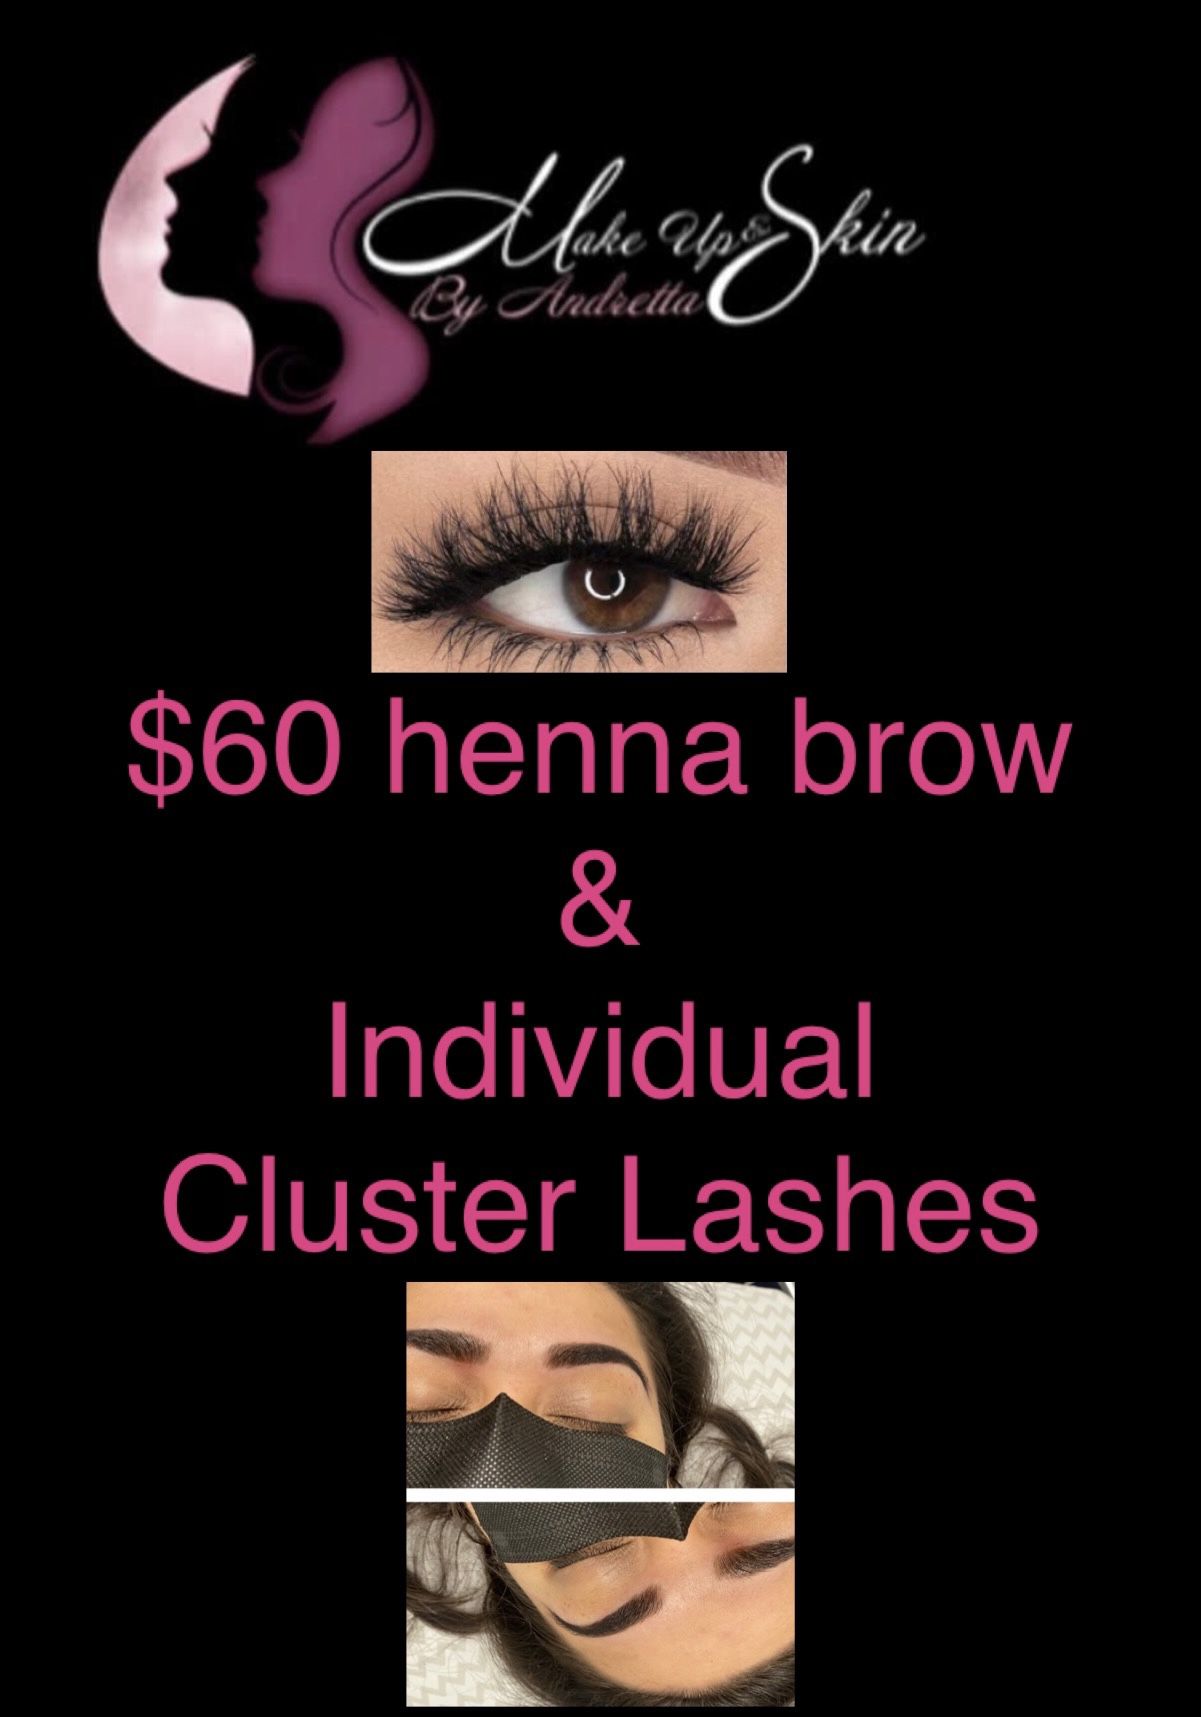 Henna Brows & Individual Cluster Lashes Deal